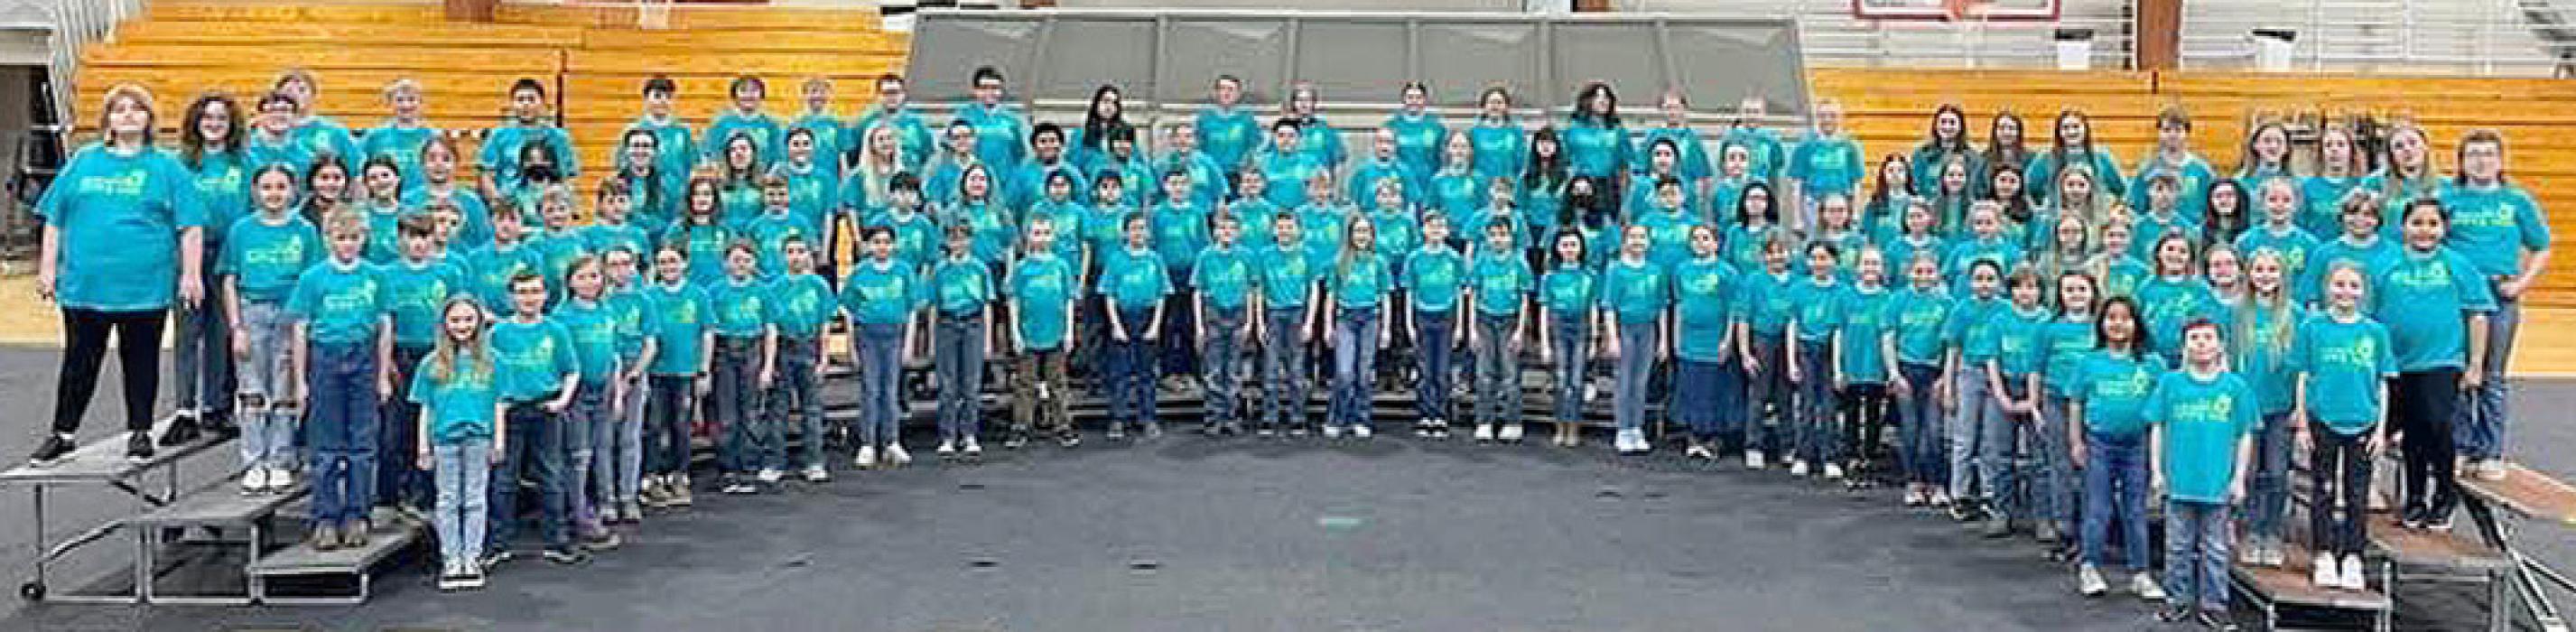 Students from Gregory, Winner, Highmore-Harrold, Colome, Chamberlain, and Wagner participated in the 14th annual SDMEA Festival Choir on Monday, March 6, in observation of Music in Our Schools Month. Julie Fastnacht, choir director in the Wessington Springs School District was the guest conductor. The public was invited to attend the performance at 3:30 that afternoon, following a day of practice.